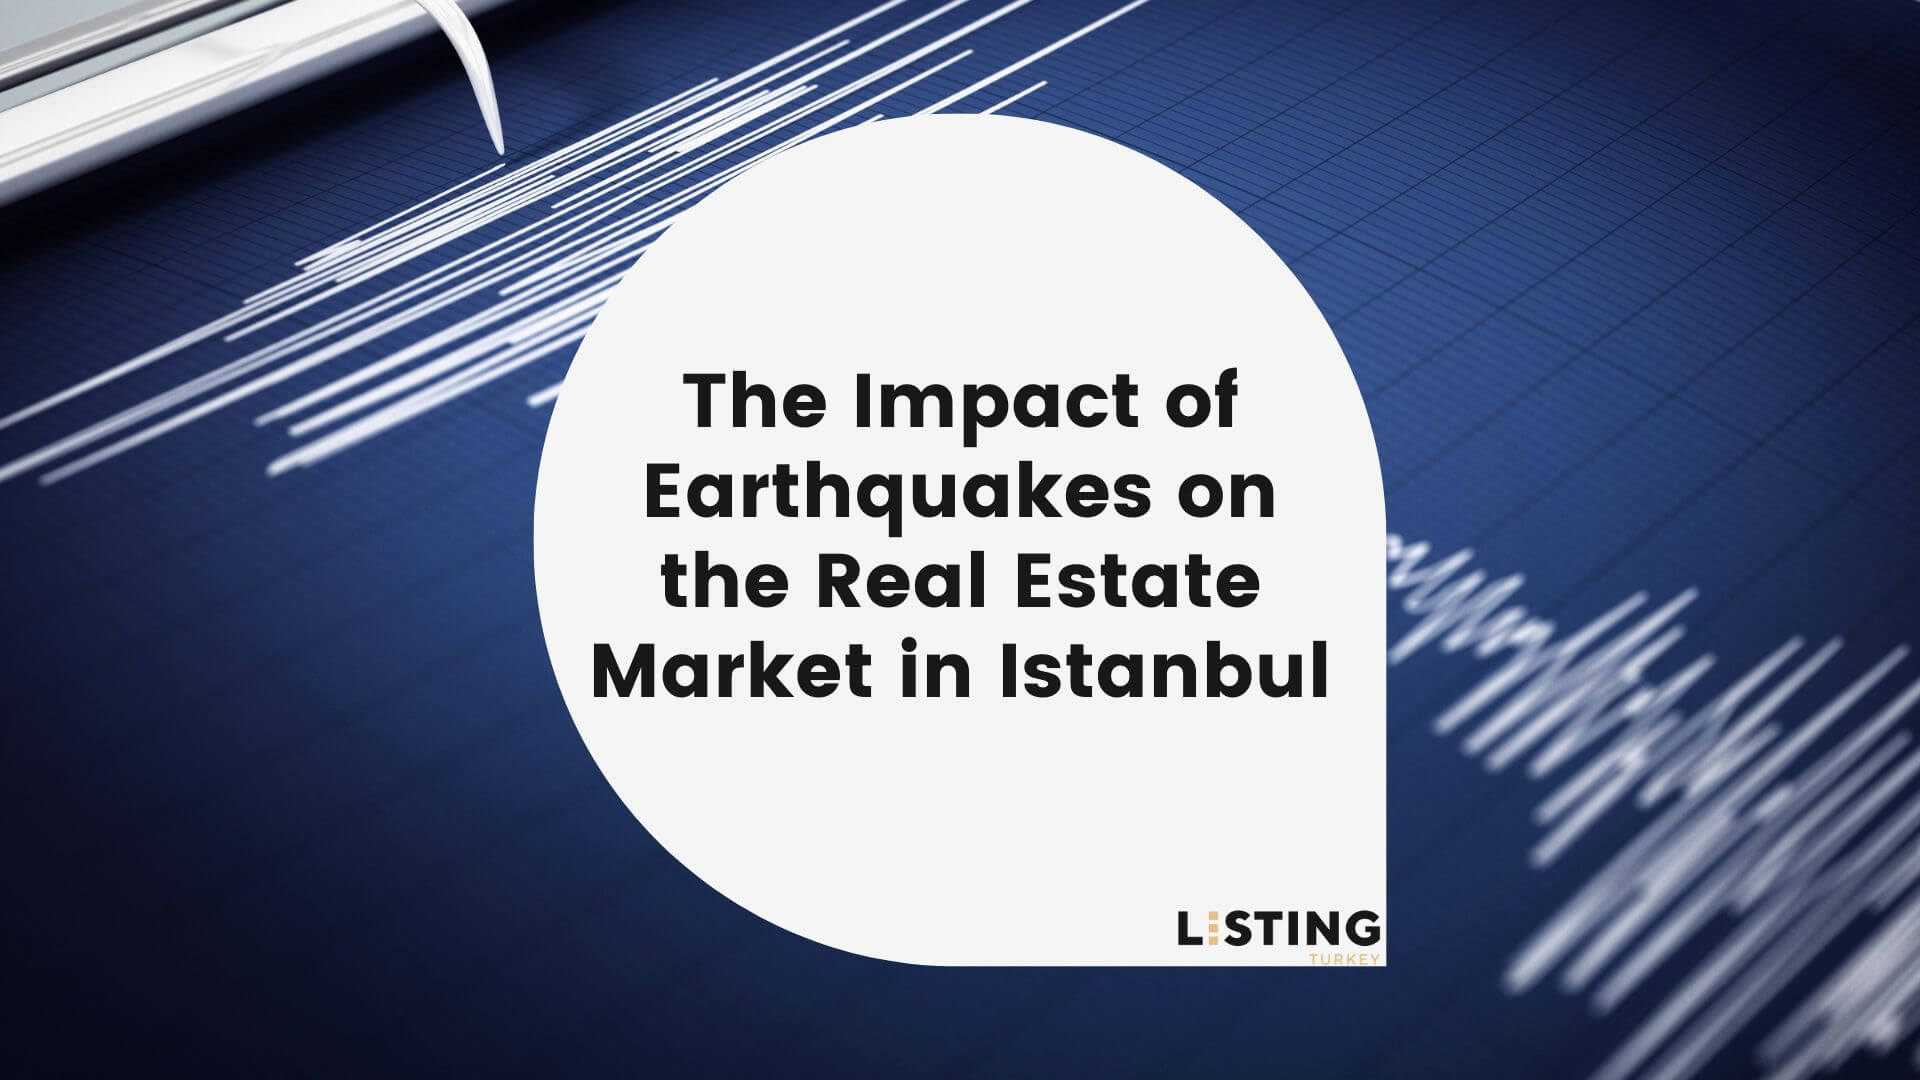 The Impact of Earthquakes on the Real Estate Market in Istanbul